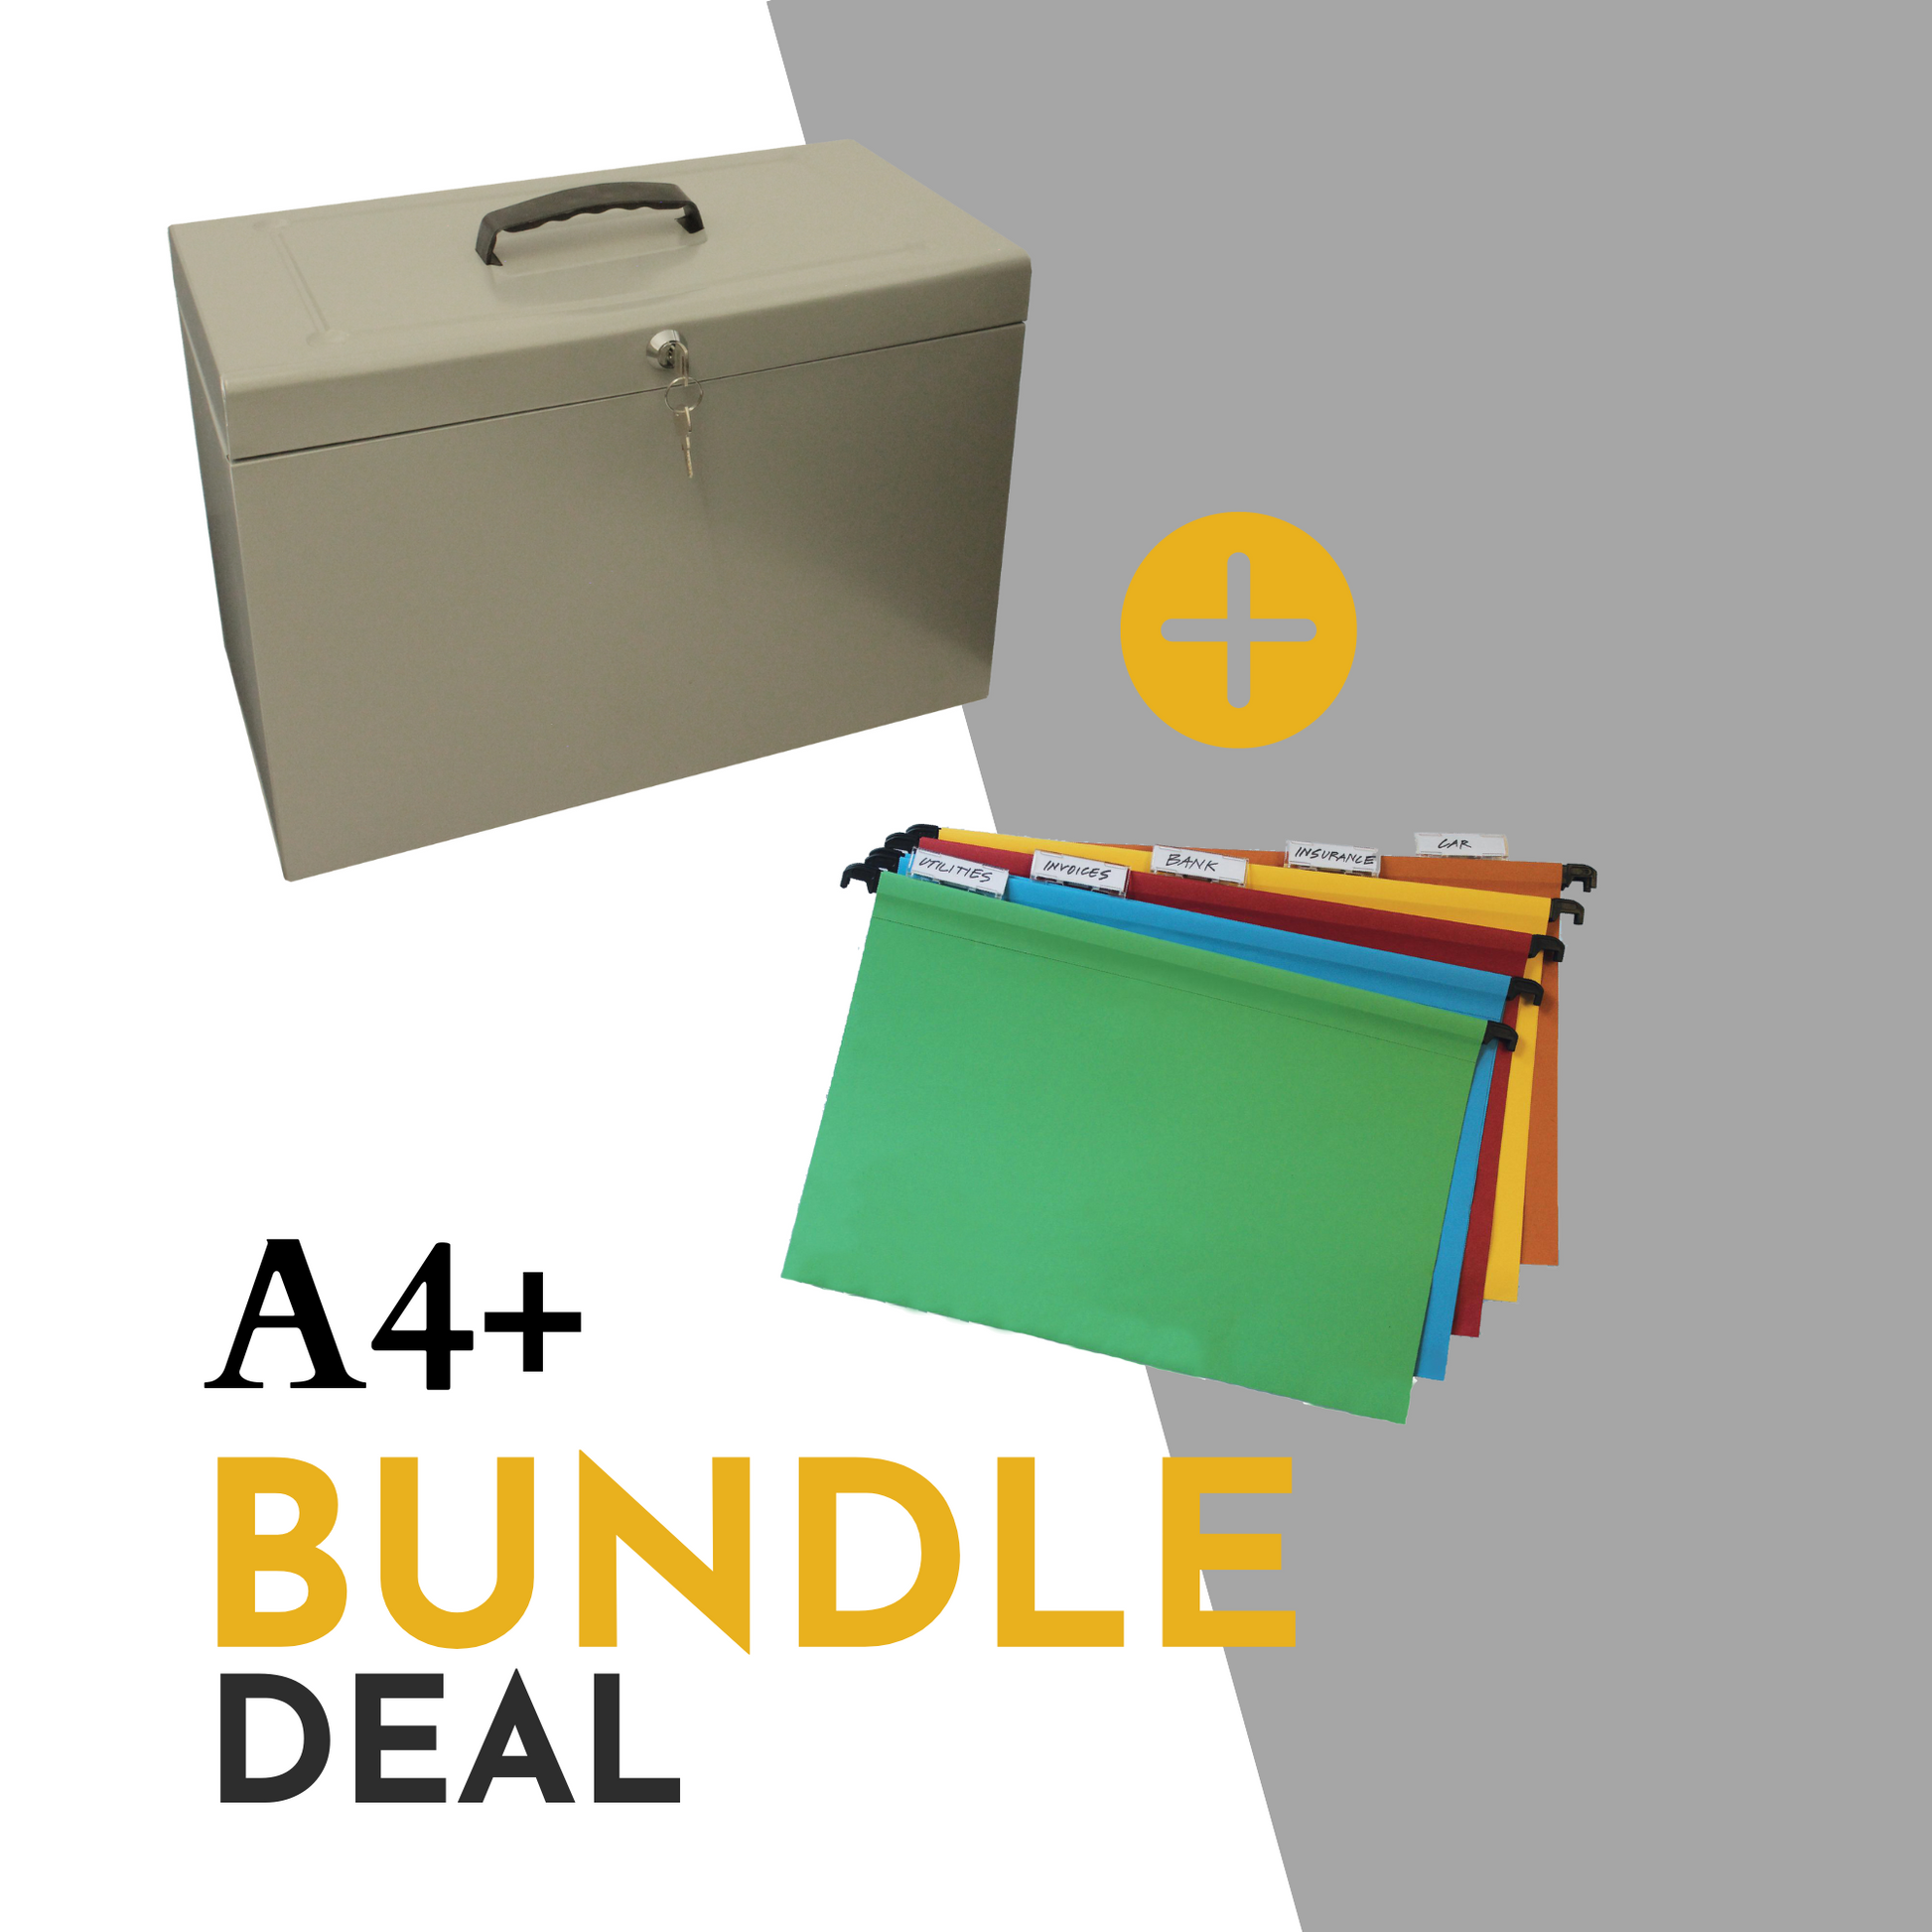 Promotional image for an A4+ (Foolscap Sized) file storage bundle deal, including a silver grey file box with a handle and key lock, plus an additional set of 10 assorted colour Foolscap suspension files with index tabs, showcasing an organized filing solution.